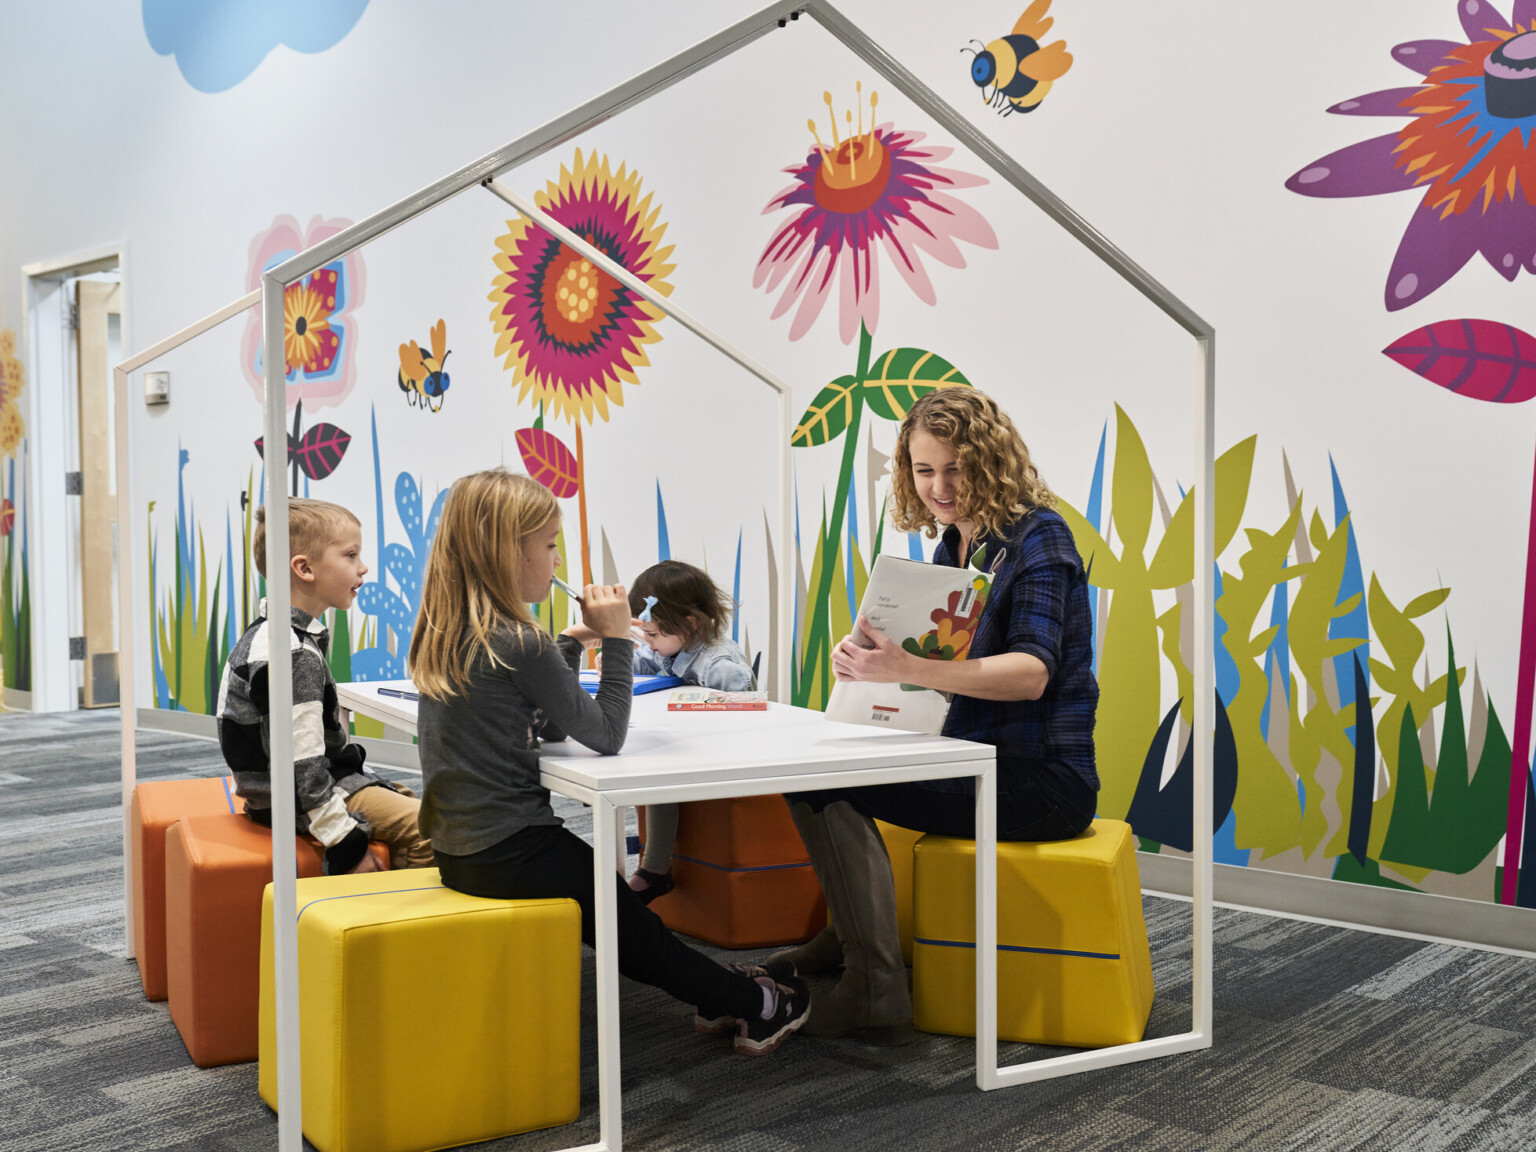 Educator and students reading on flexible comfortable yellow stools at white table with house shaped frame. Bright graphic mural